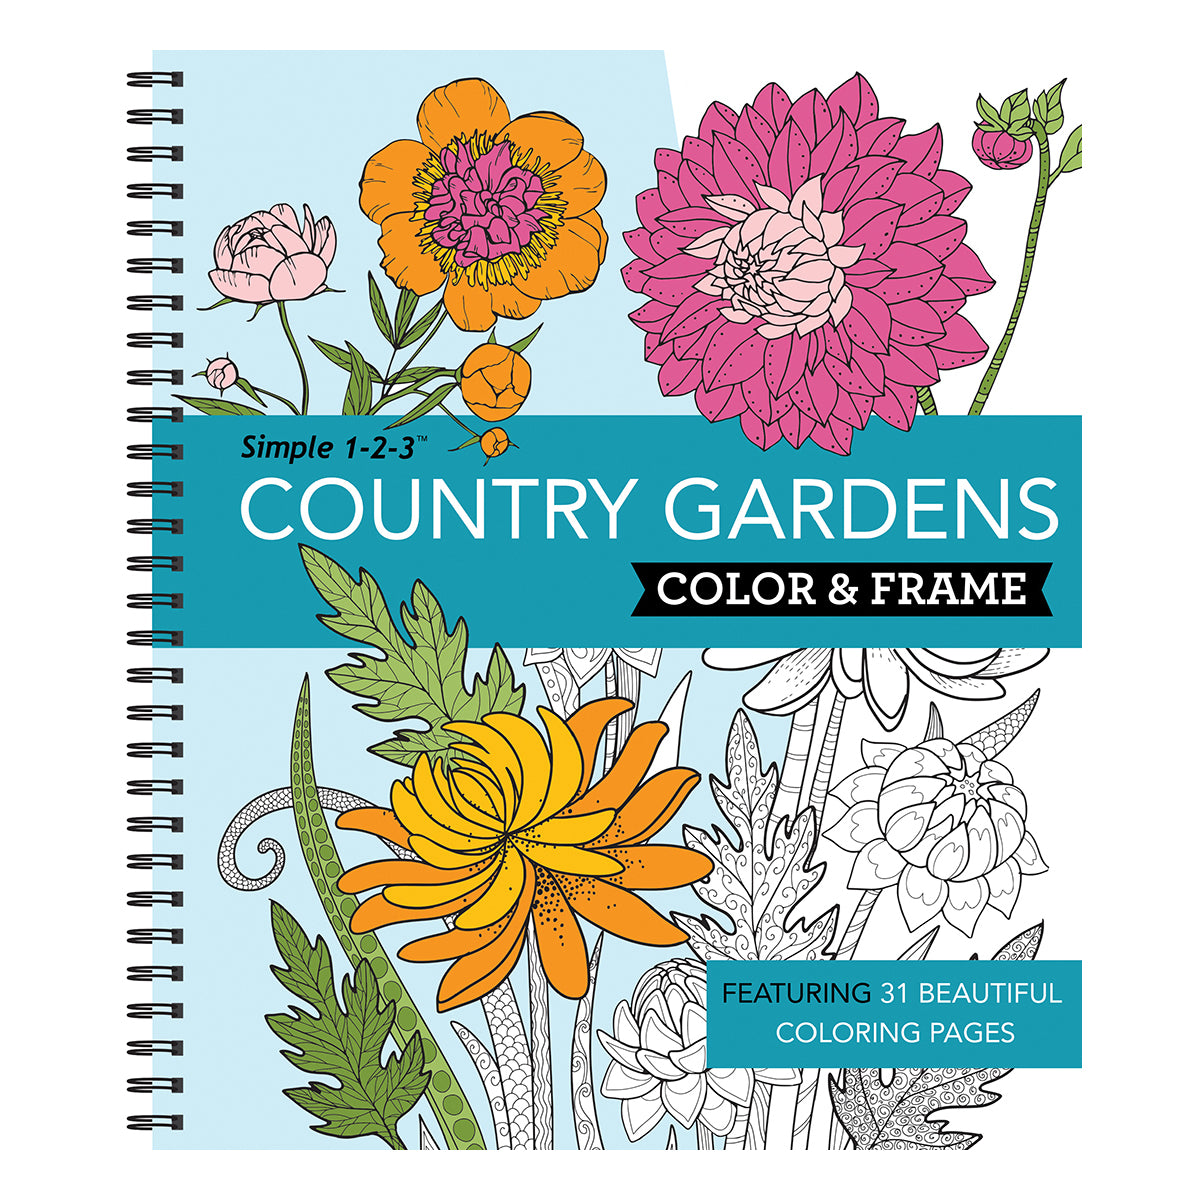 Color & Frame  Country Gardens Adult Coloring Book